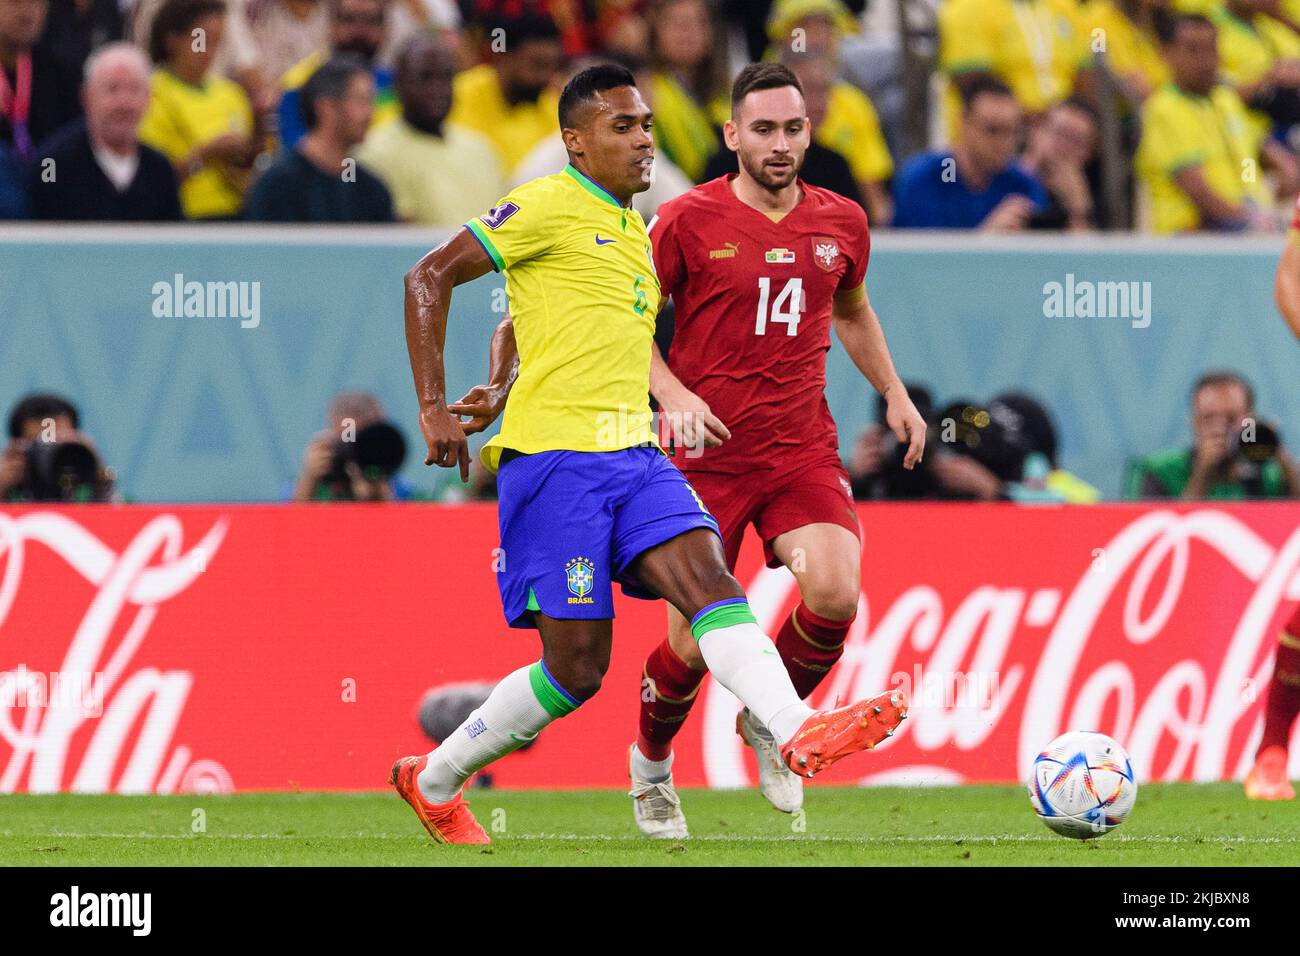 Lusail, Qatar. 24th Nov, 2022. Lusail, Qatar, Nov 25th 2022: Danilo of Brazil during a match between Brazil vs Serbia, valid for the group stage of the World Cup, held at the Lusail National Stadium in Lusail, Qatar. (Marcio Machado/SPP) Credit: SPP Sport Press Photo. /Alamy Live News Stock Photo